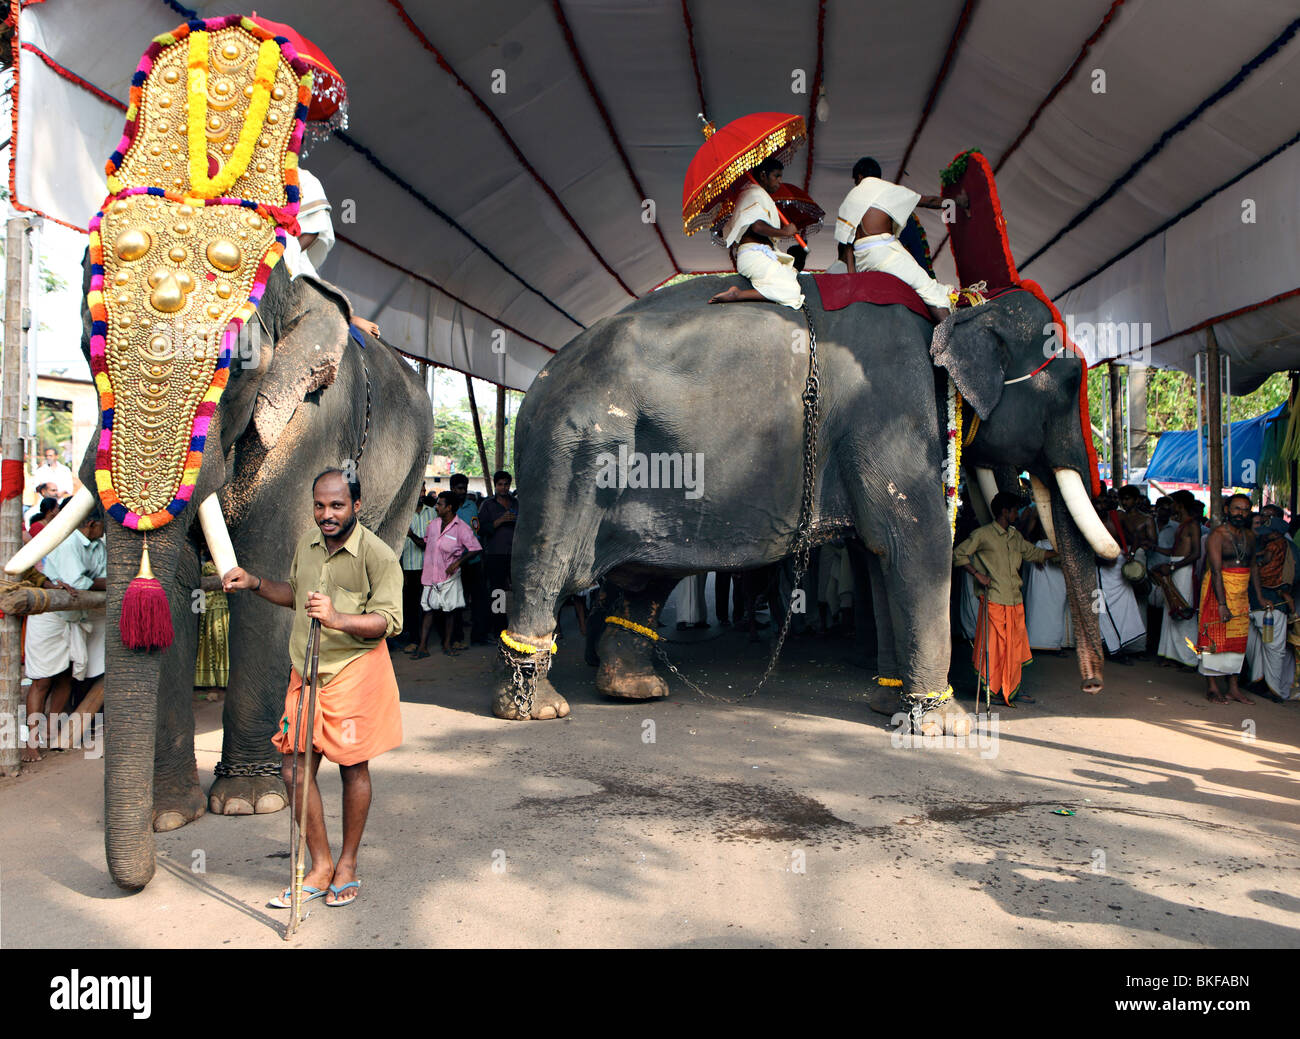 A caparisoned elephant leads the procession out from under a canopy during the festival at a Hindu temple in Varkala, Kerala Stock Photo